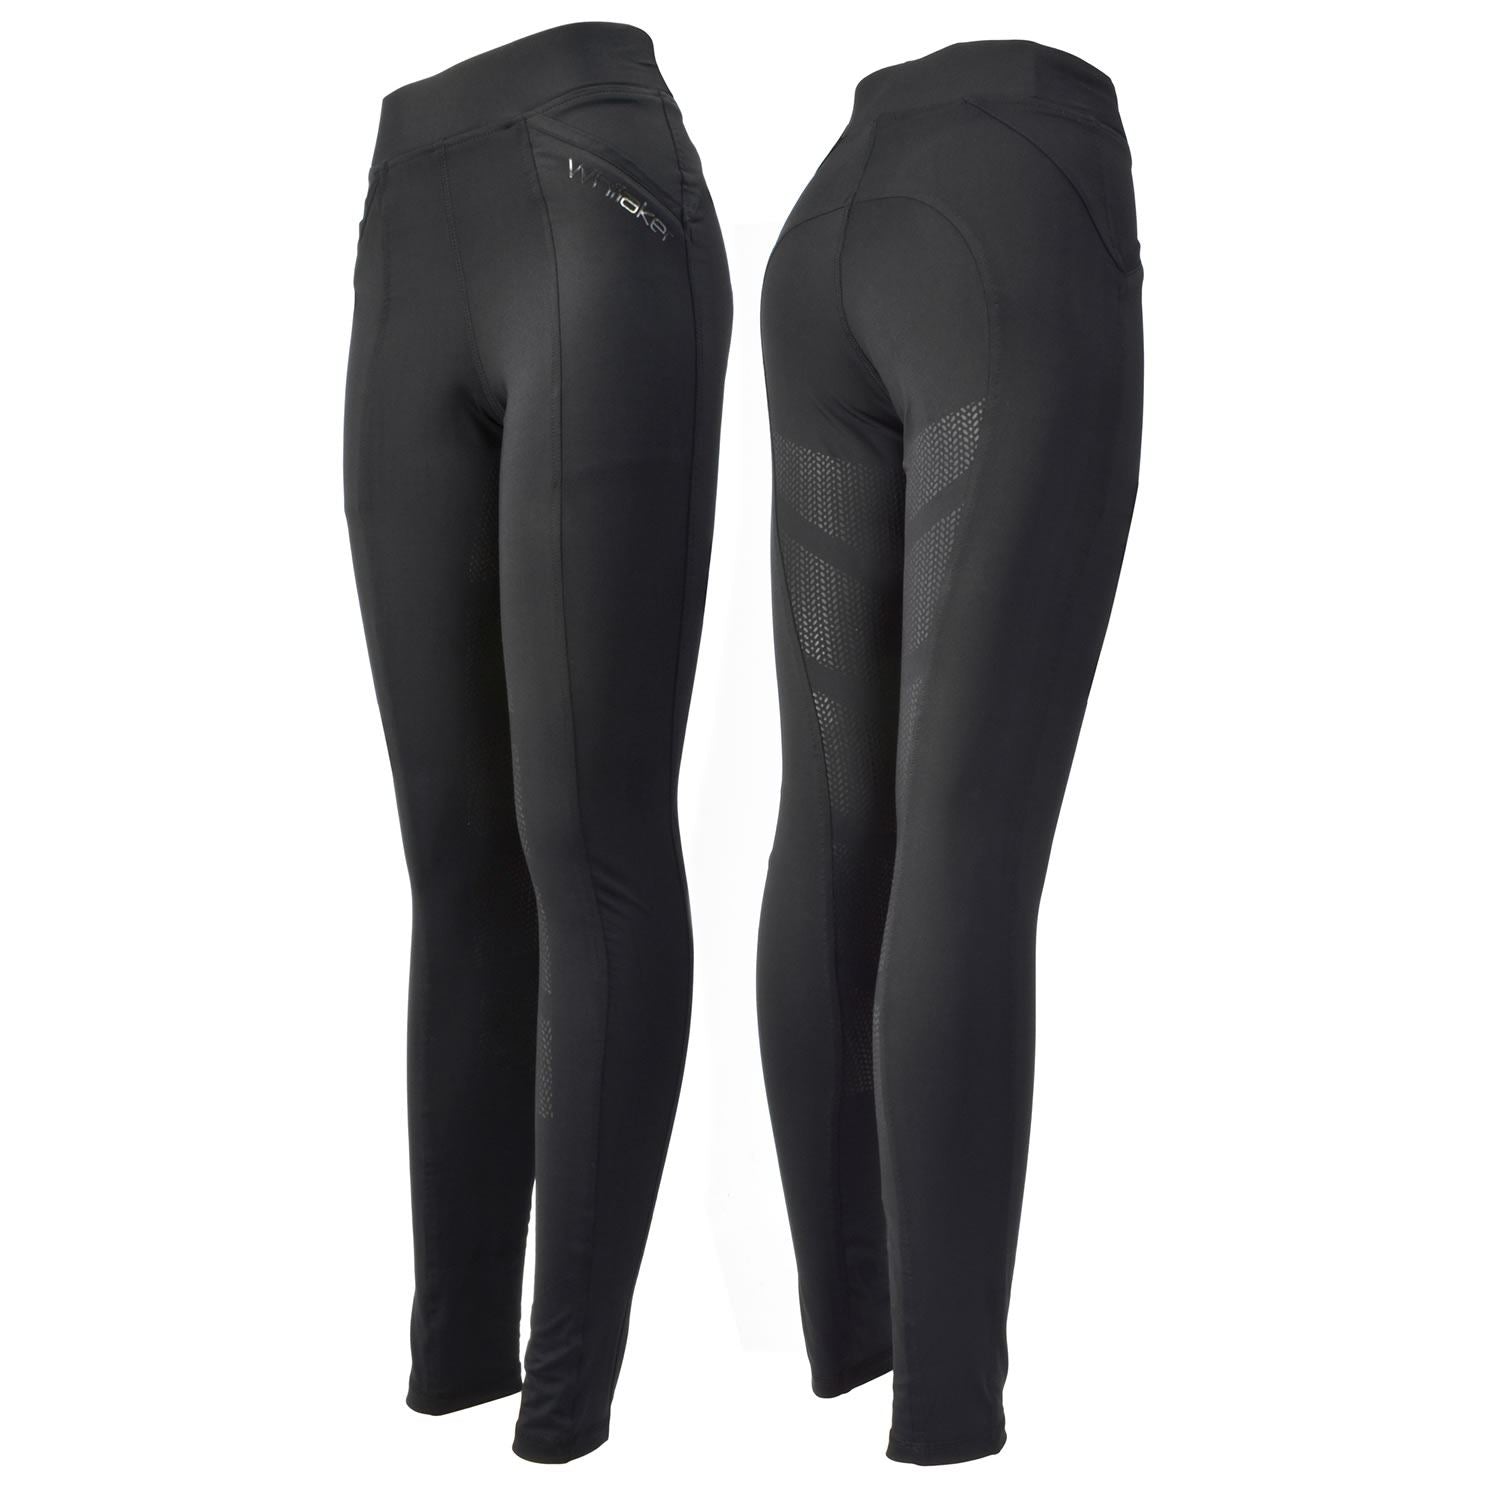 Whitaker Scholes Riding Tights - Just Horse Riders